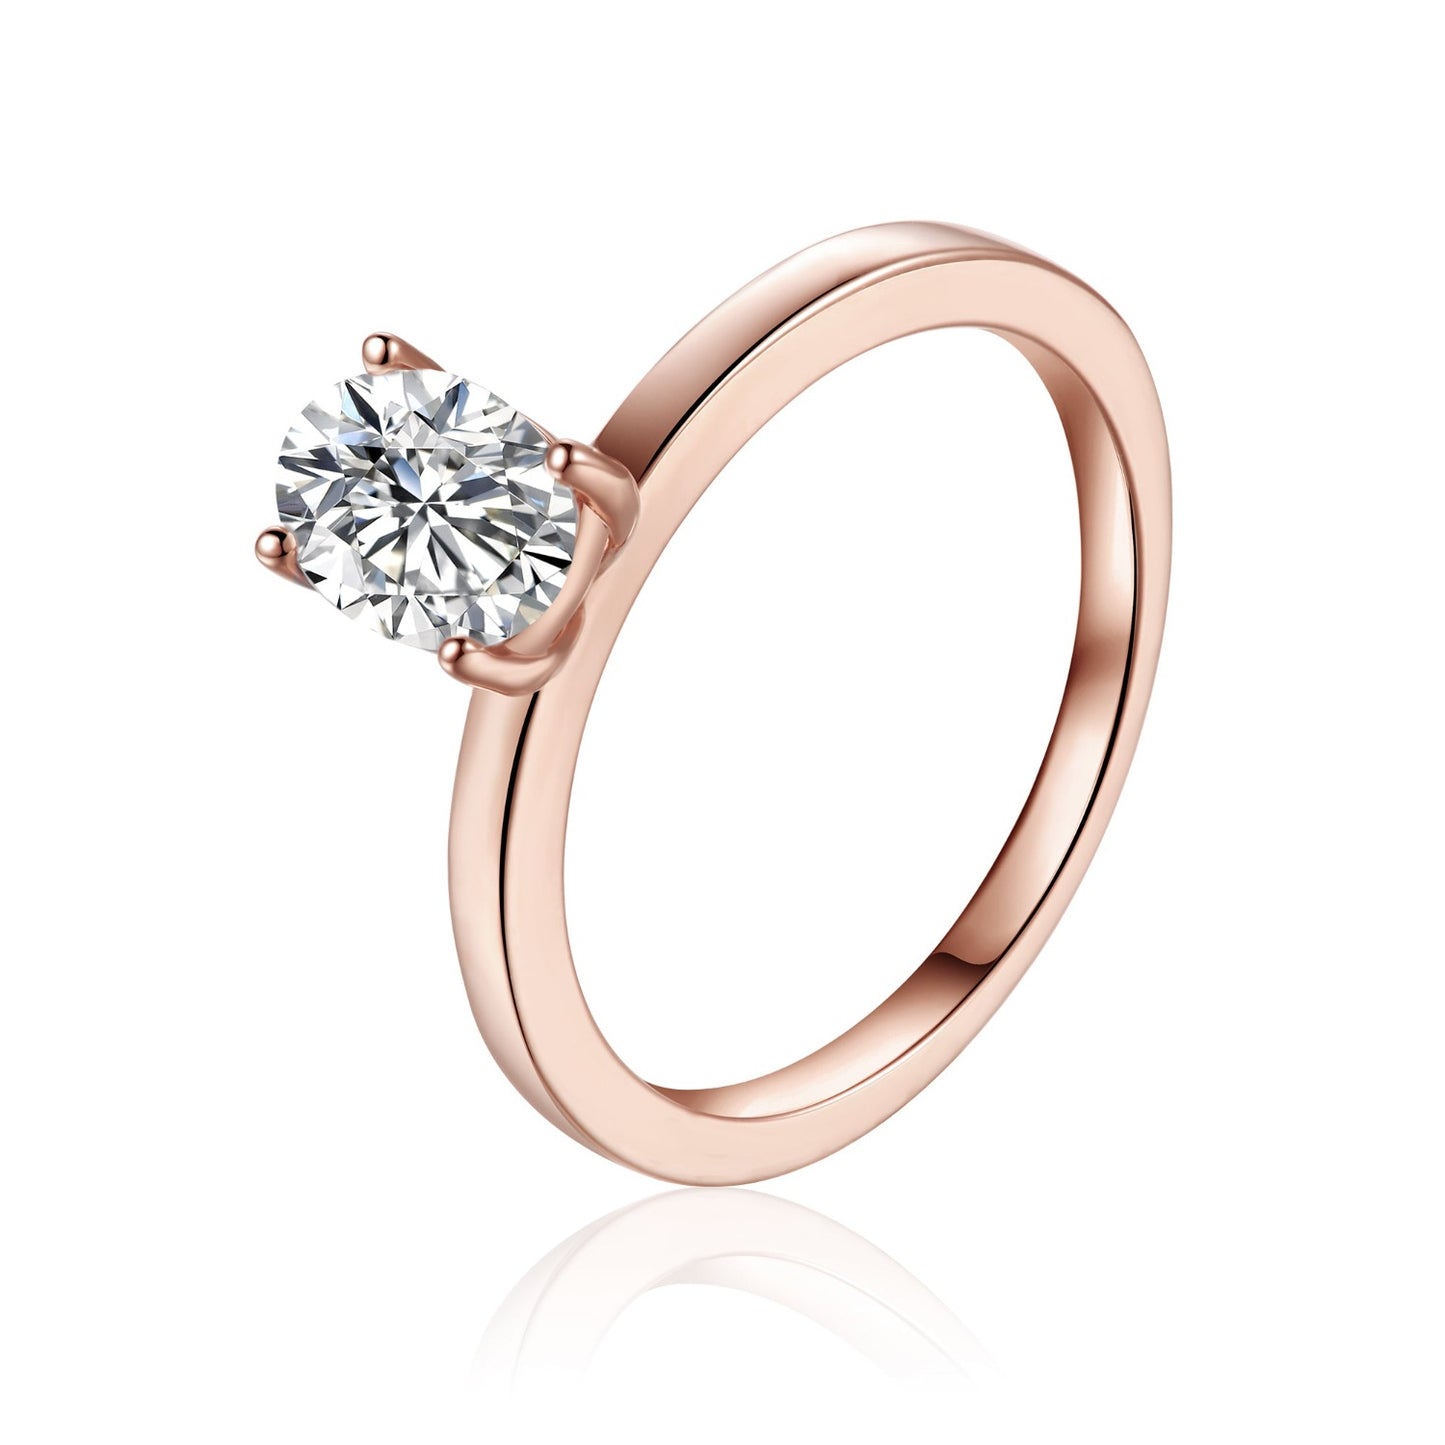 Classic 4 Claw Oval Solitaire 1.00ct Moissanite Engagement Ring Set in 9ct Rose Gold